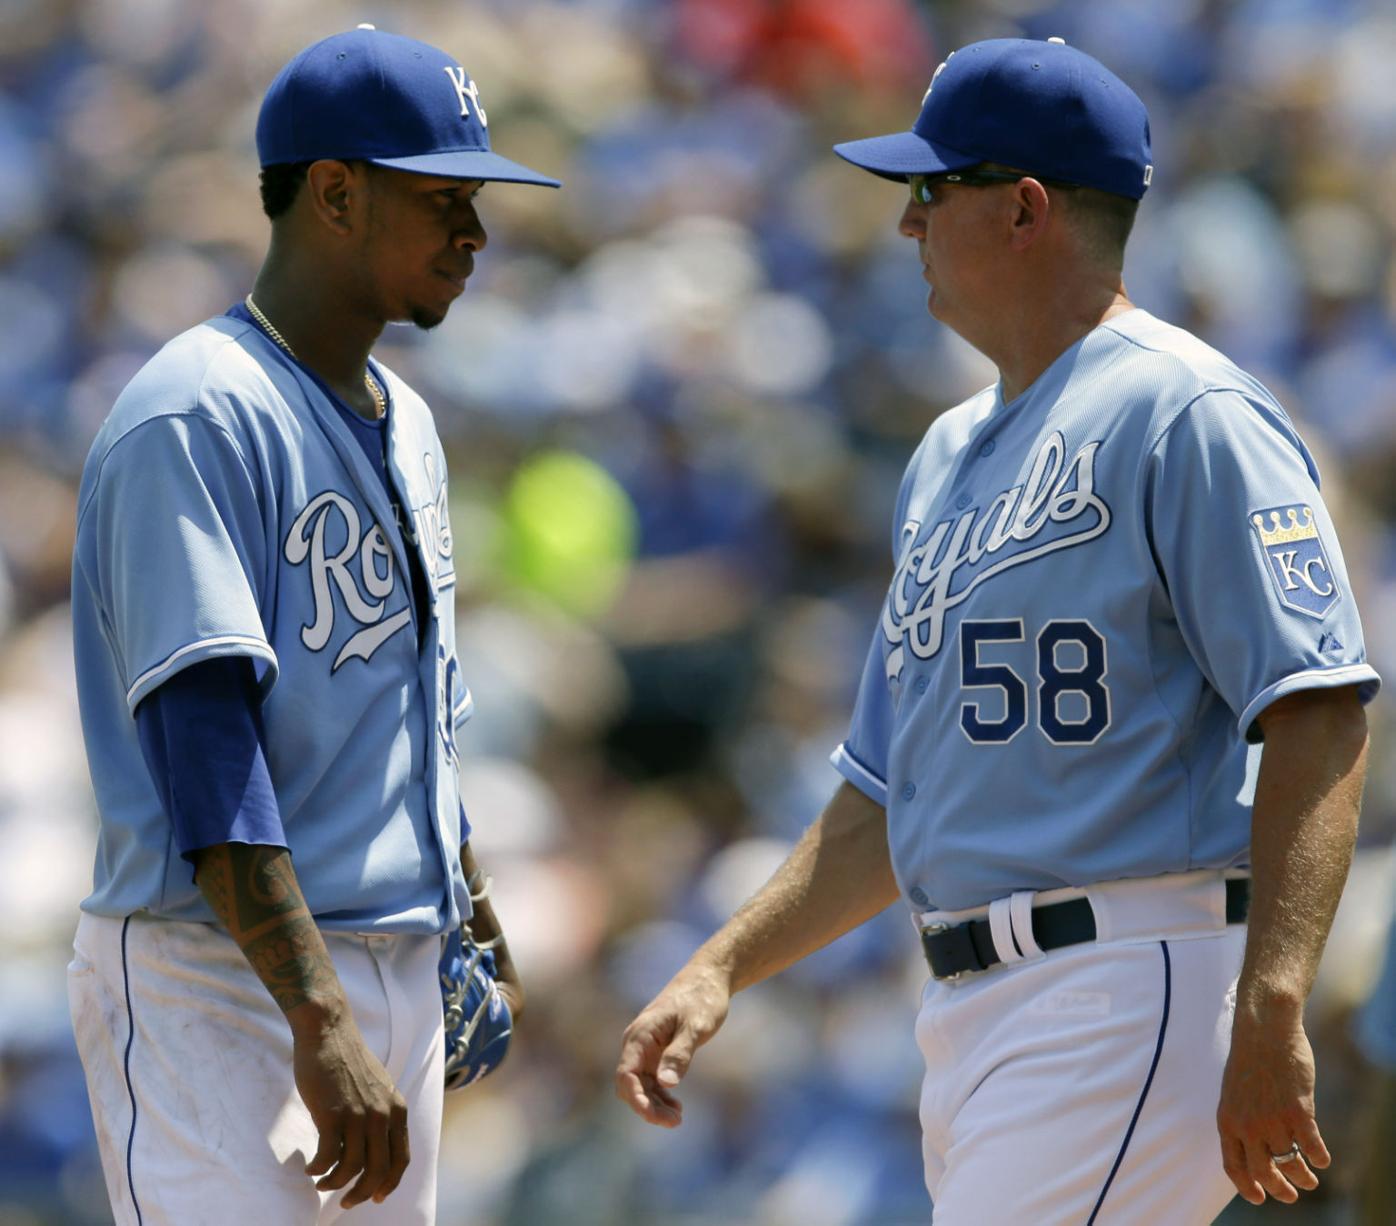 Ventura goes distance, but Royals fall to Rangers